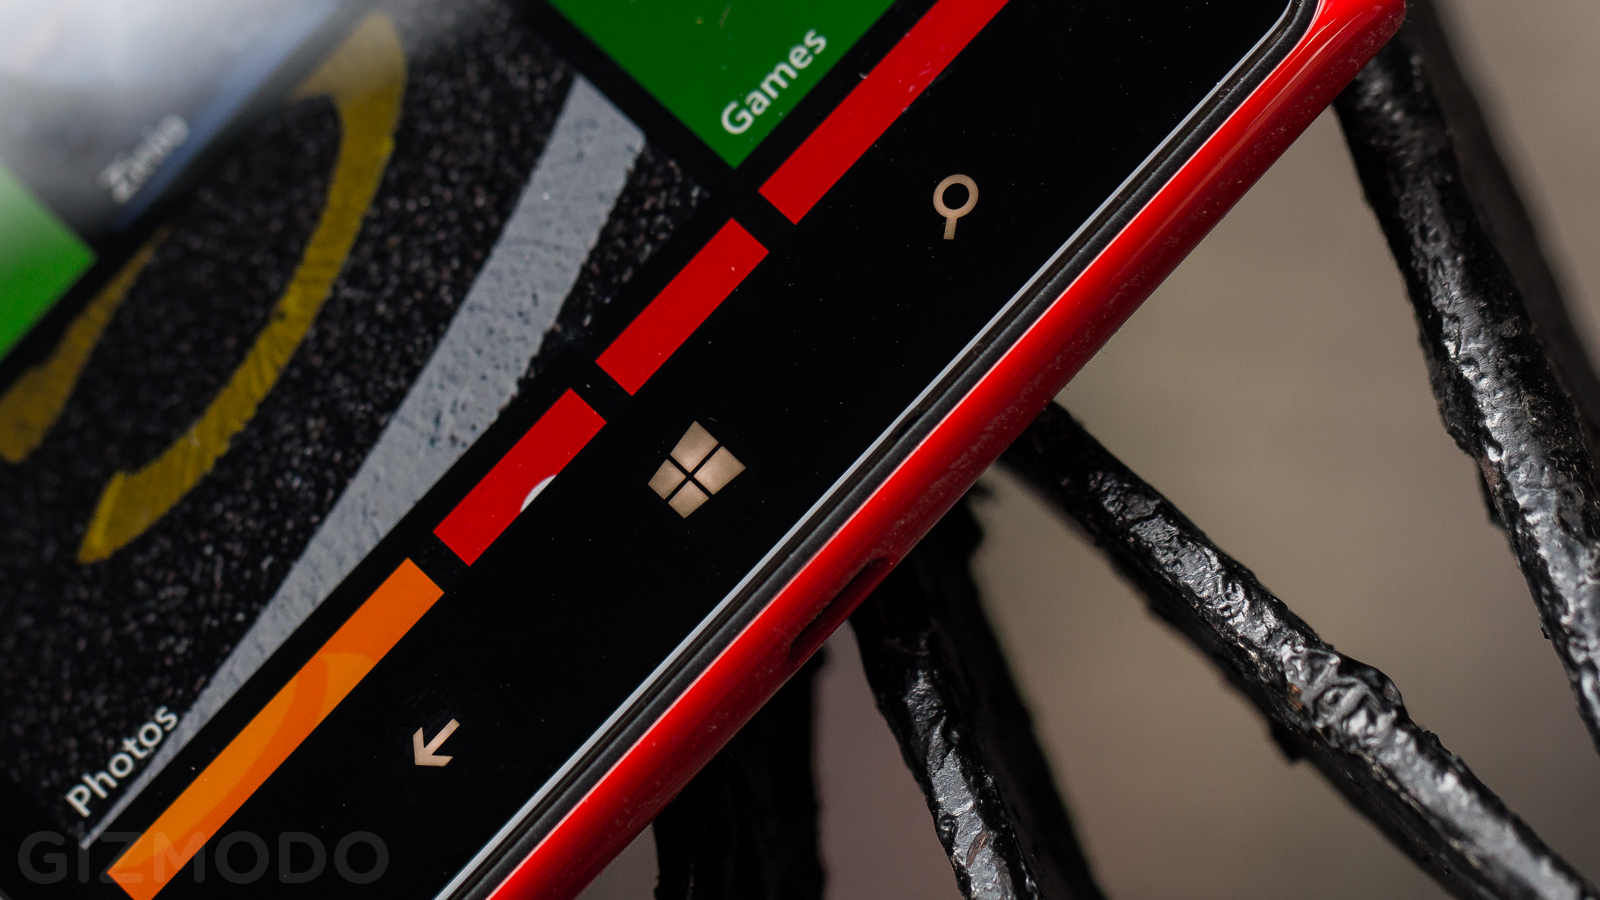 Nokia Lumia 1520 Review: A Burden In My Hand